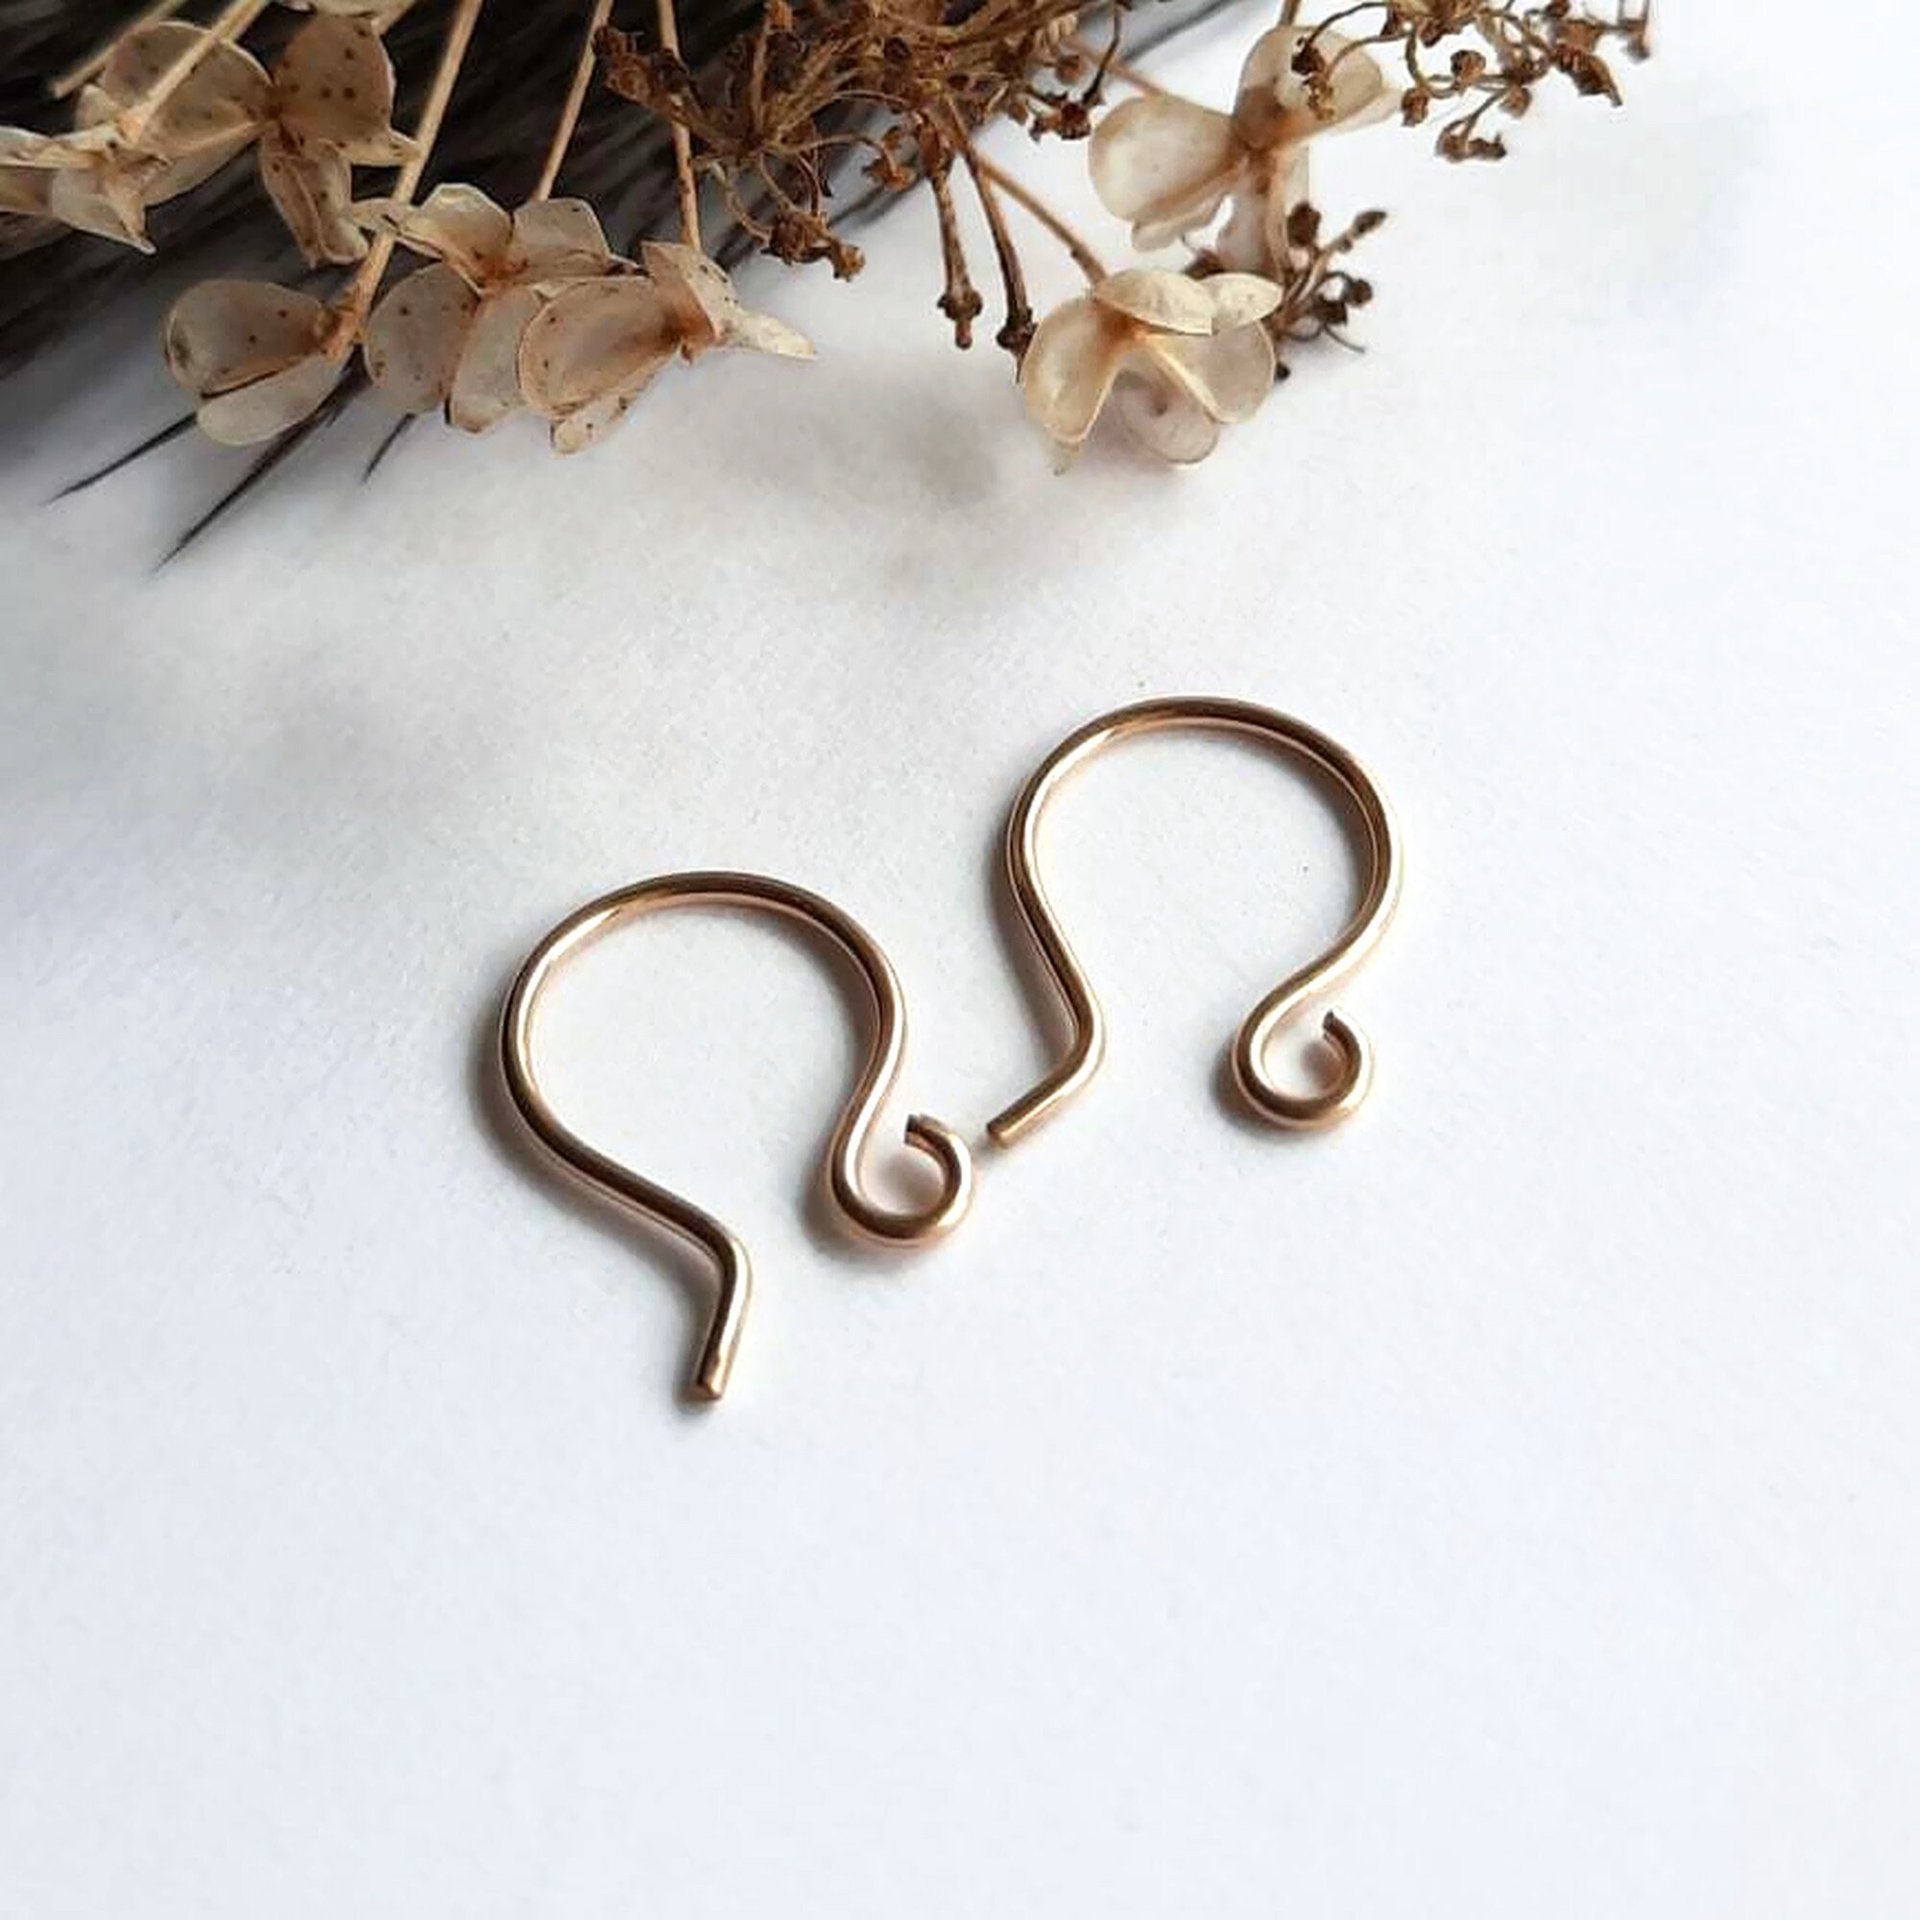 Mini 14K Gold Filled Fish Hook Ear Wires ~ Handmade by The Tiny Tree Frog Jewellery